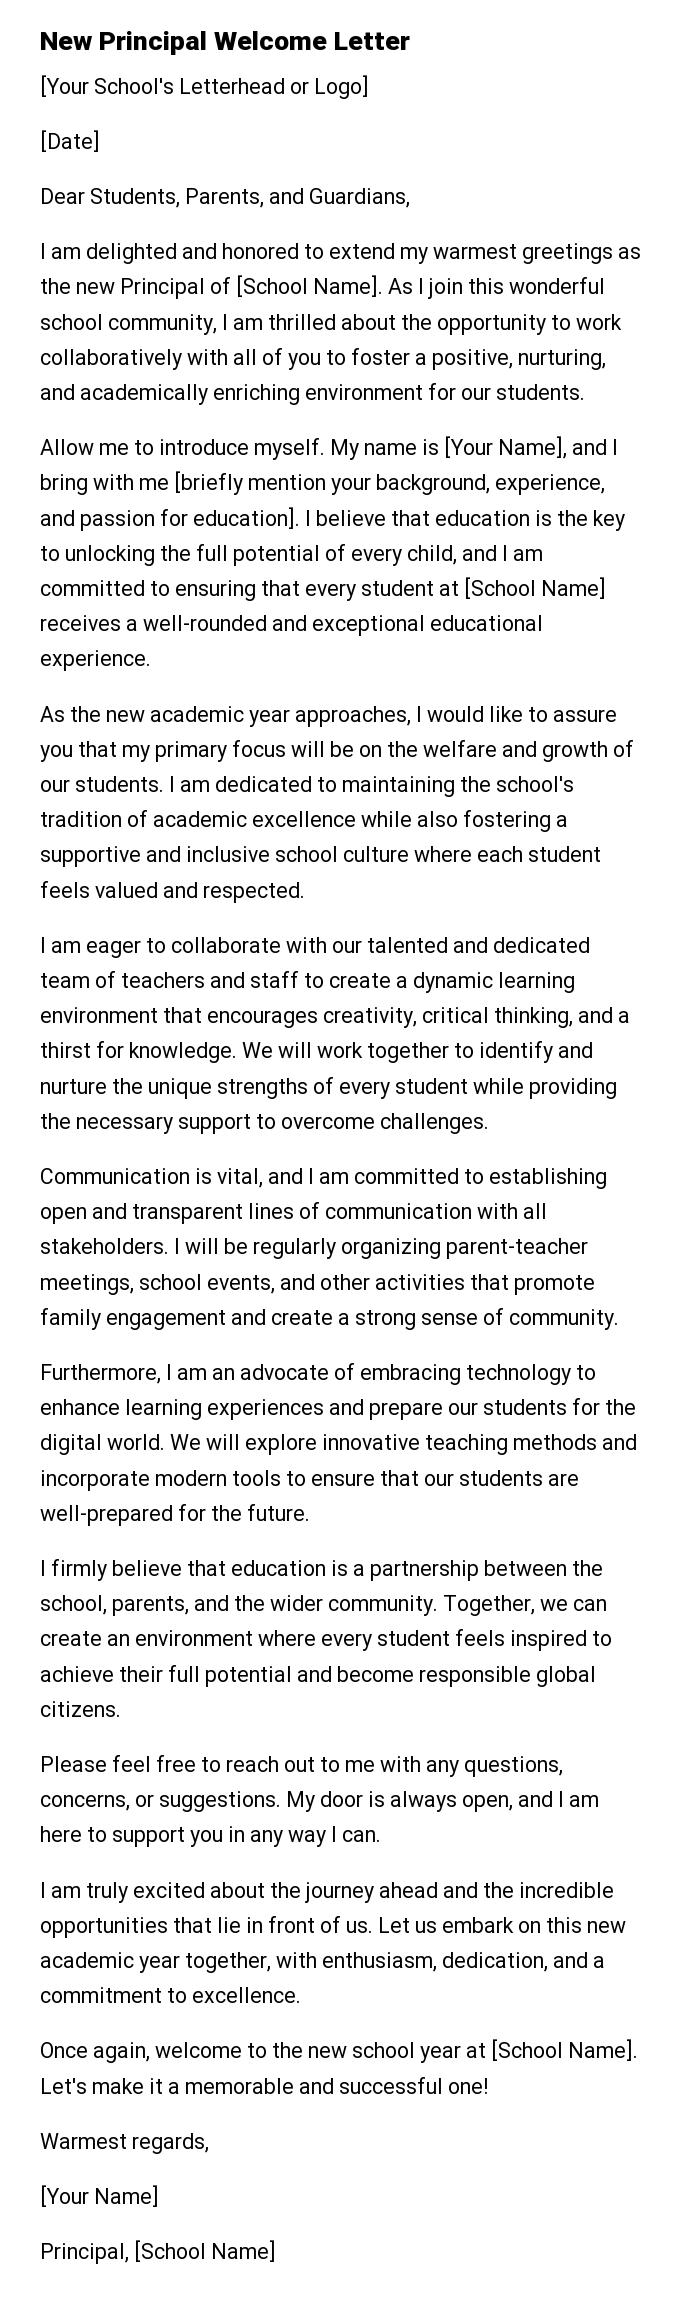 New Principal Welcome Letter